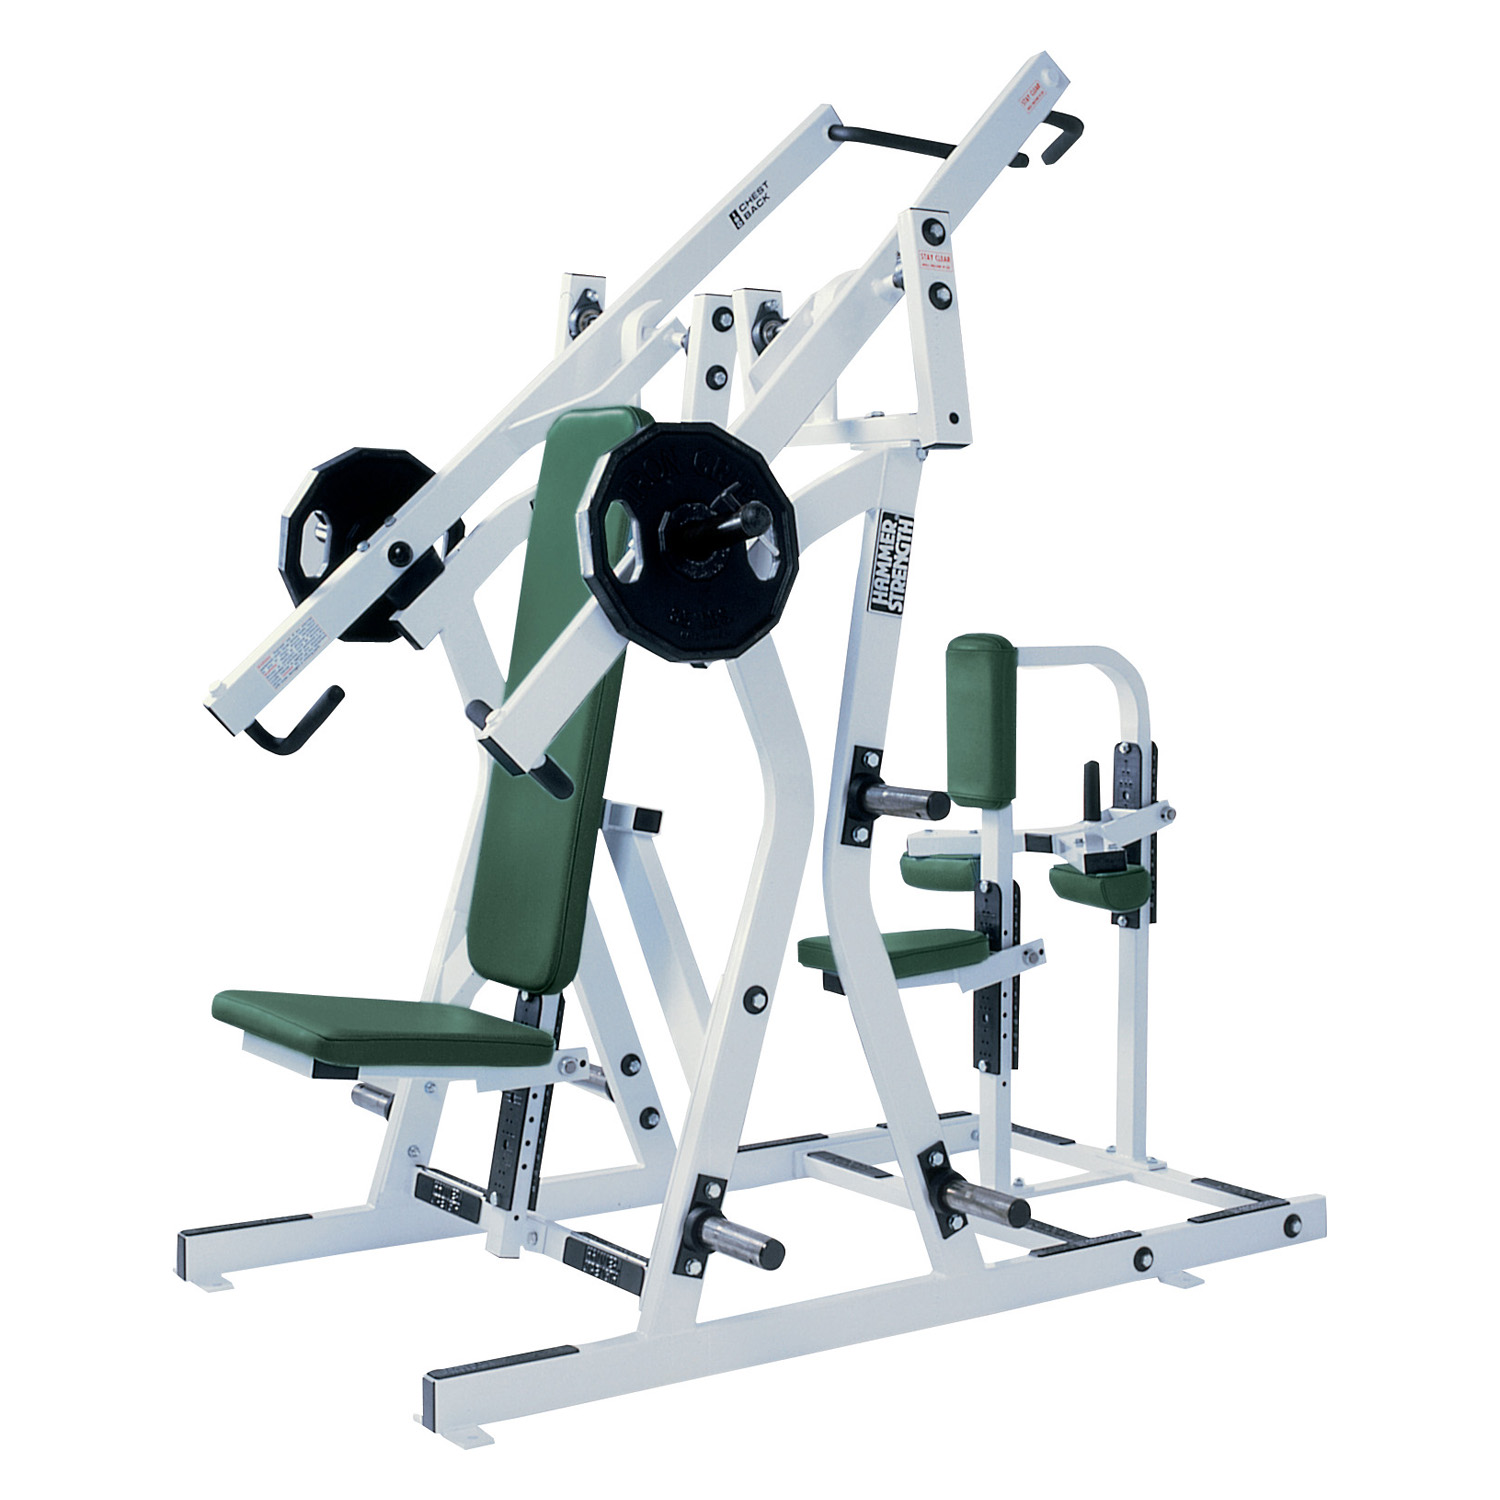 Грудной жим сидя Hammer Series Iso-Lateral Chest Back HS-3002